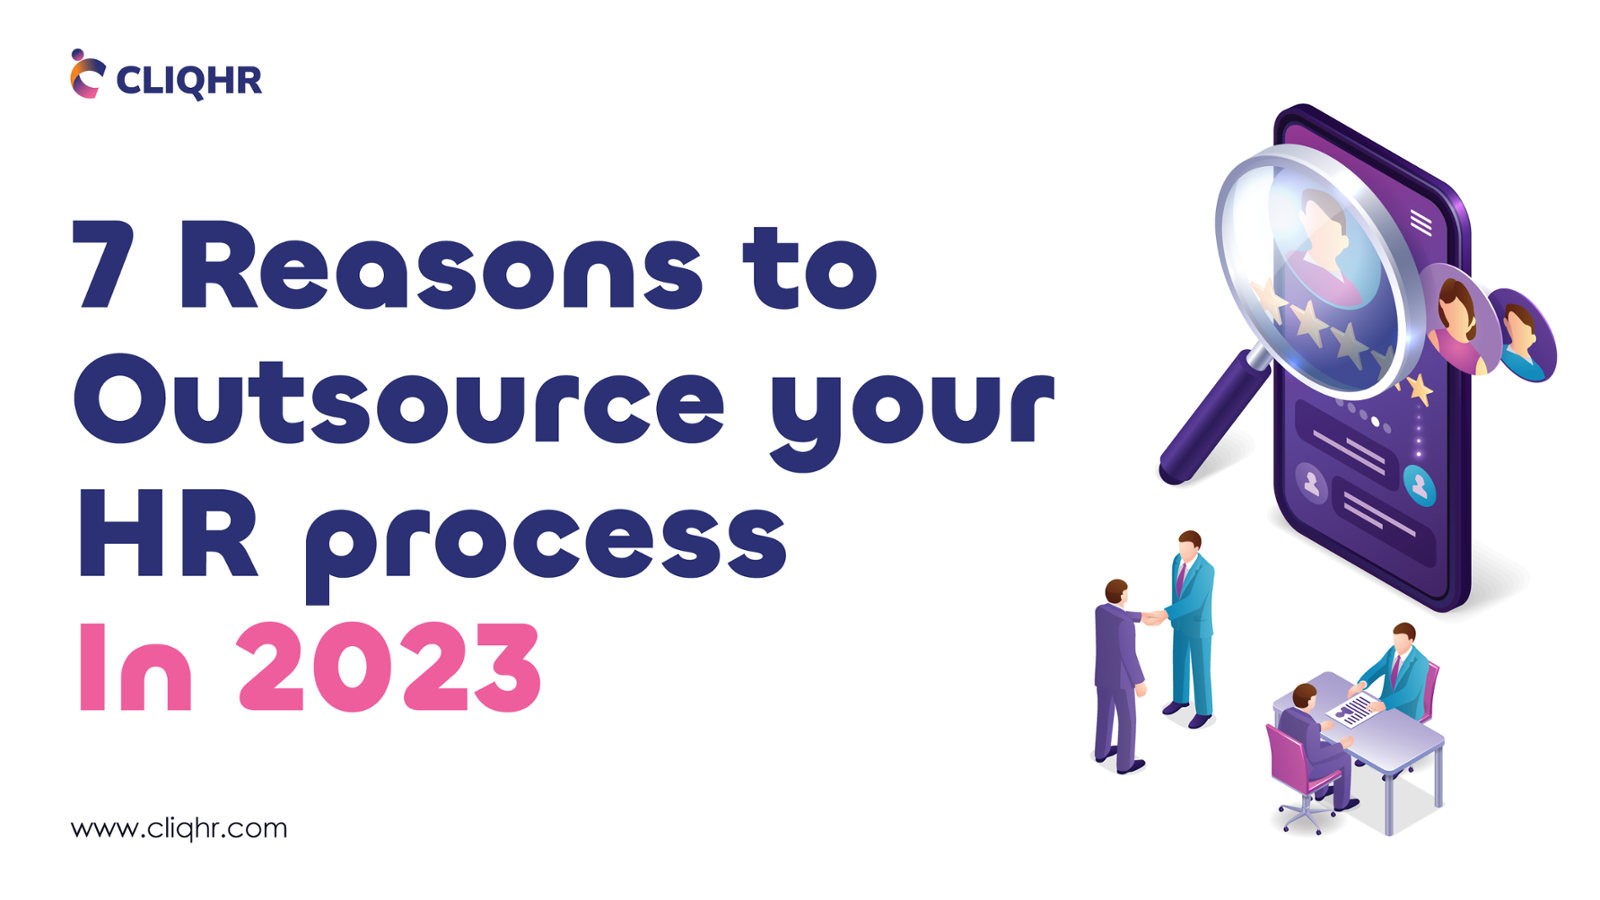 Reasons To Outsource Your HR Process In 2023